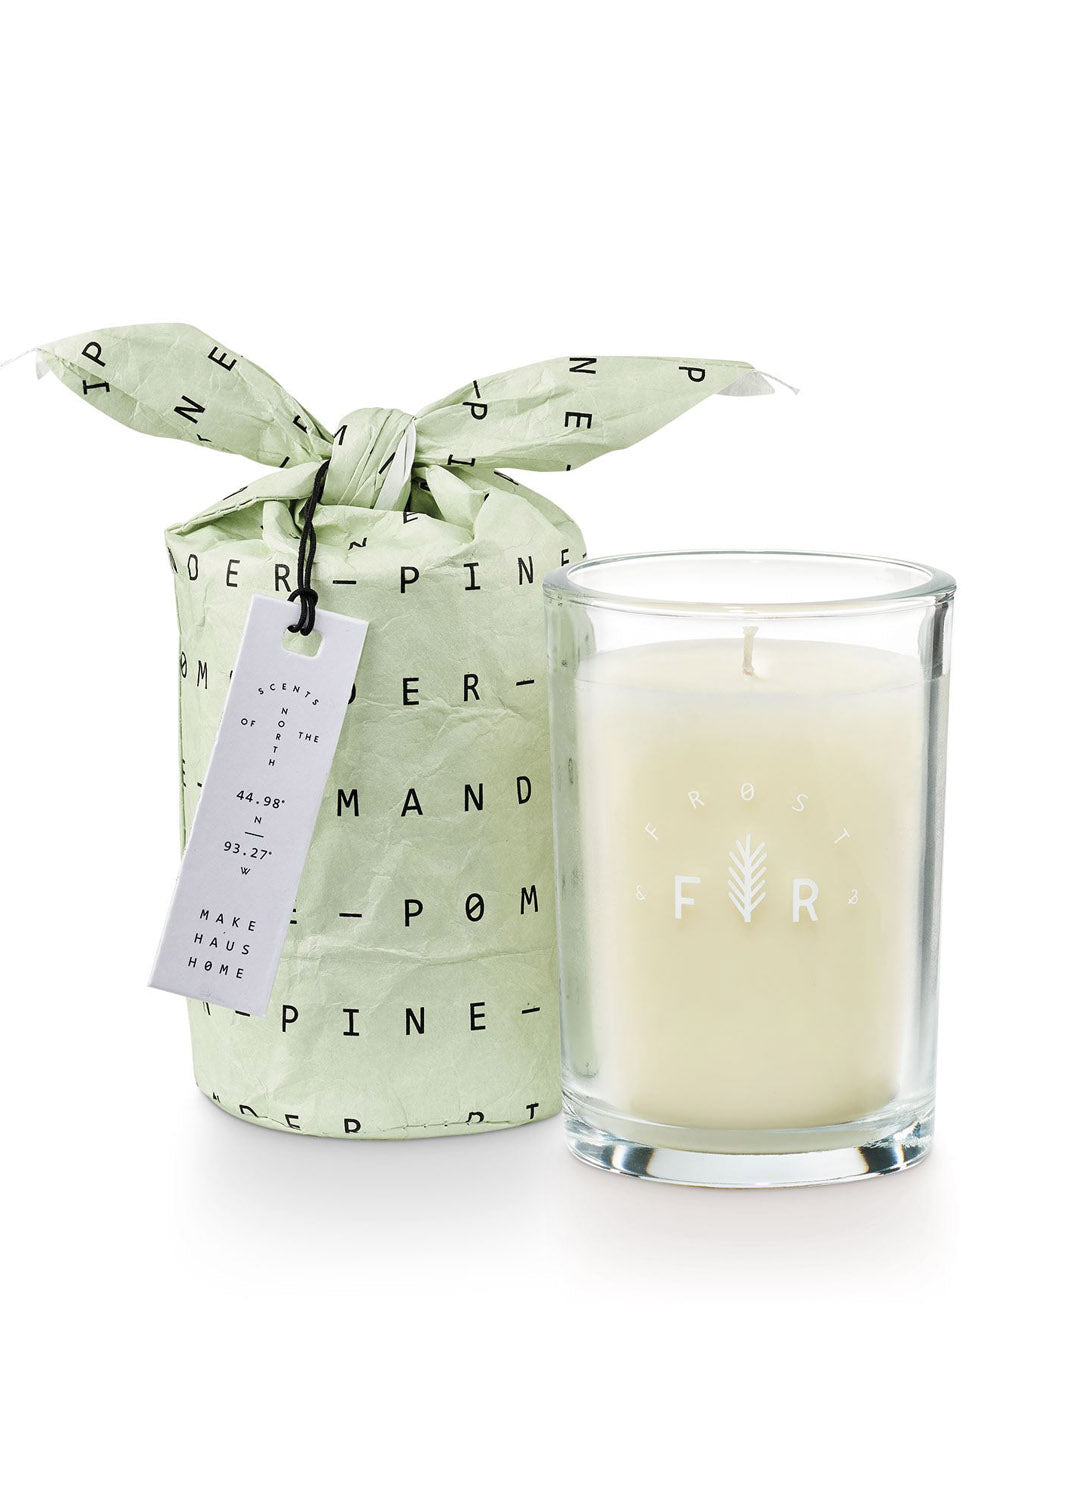 Frost & Fir Bagged Glass Soy Candle - FINAL SALE Home & Lifestyle Pomander Pine